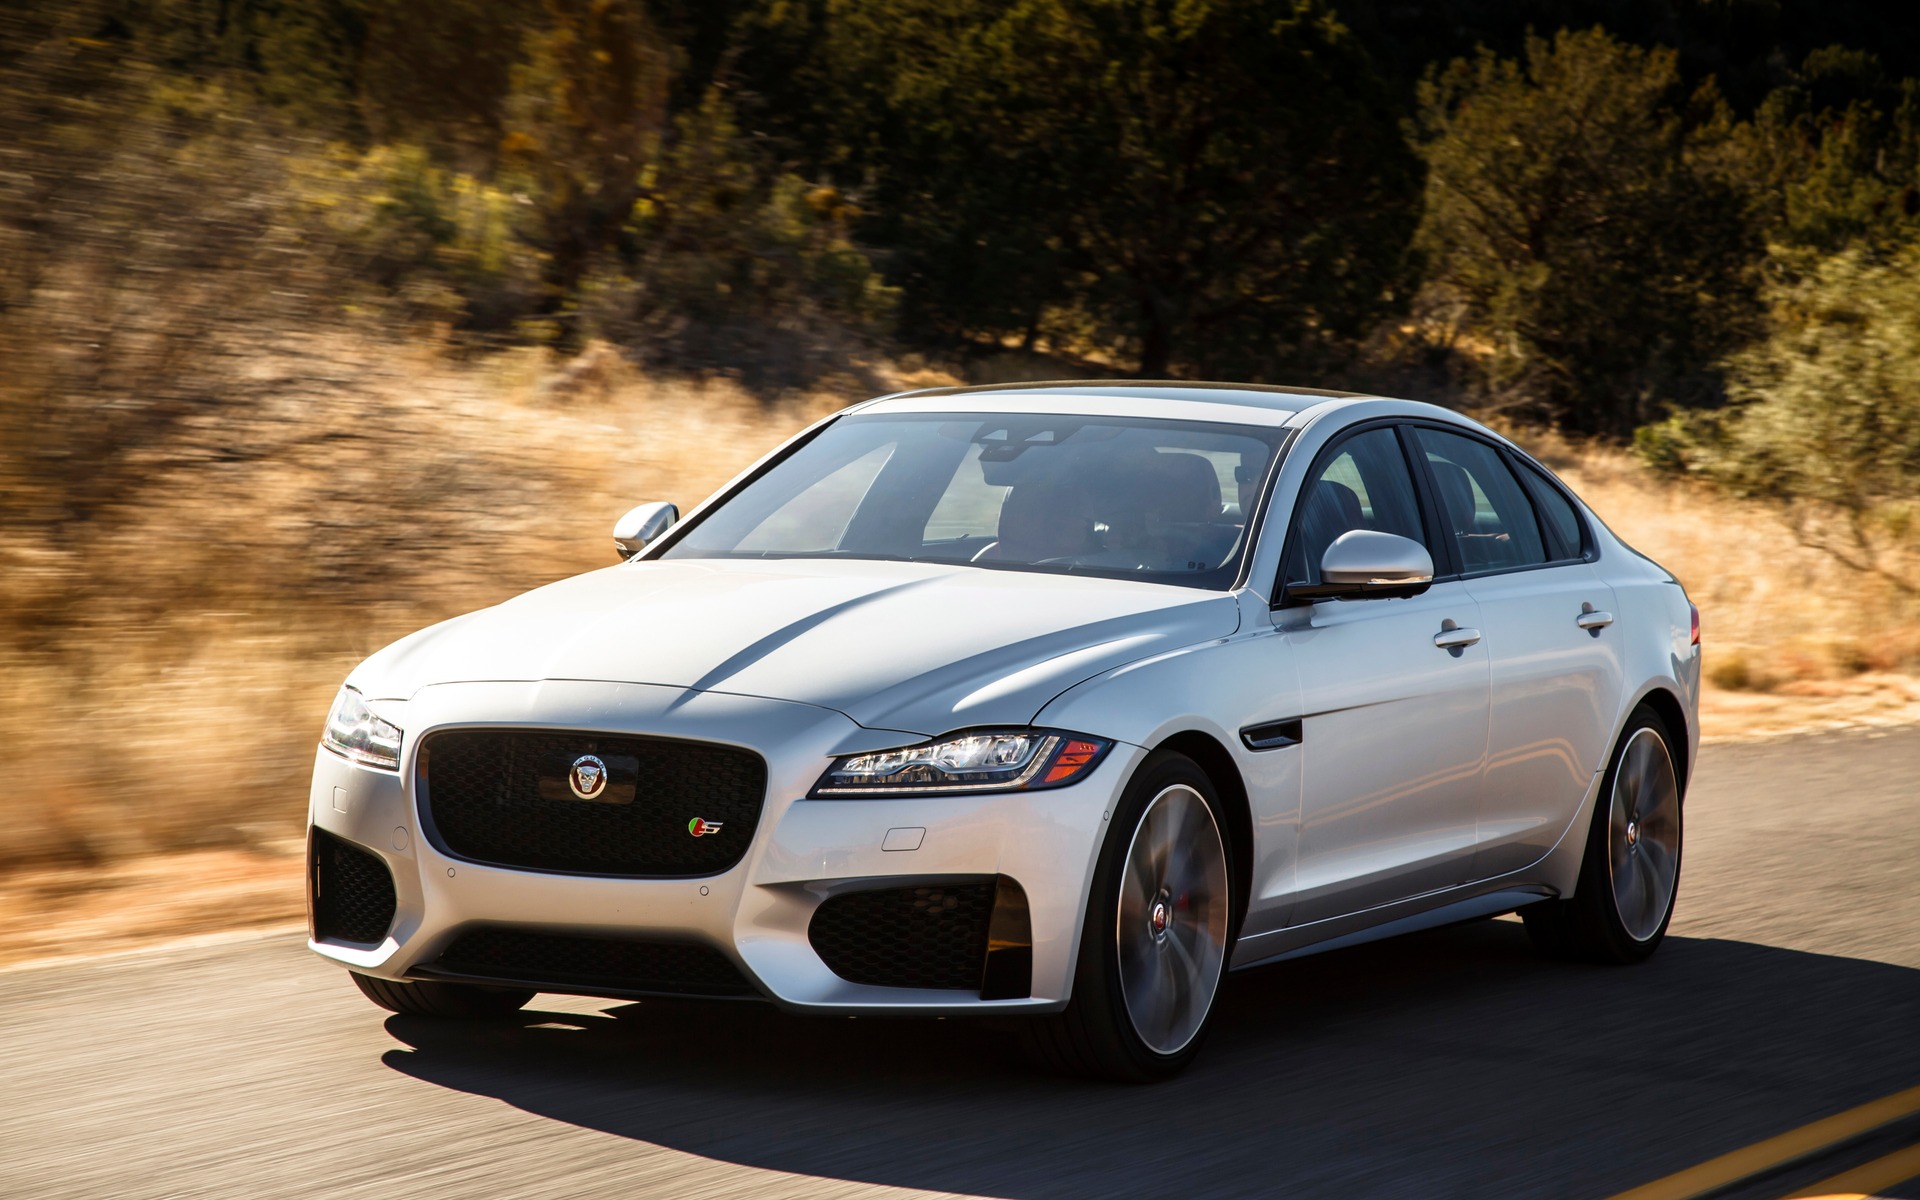 The 2016 Jaguar XF S boasts a supercharged 3.0L V6 that develops 380 hp